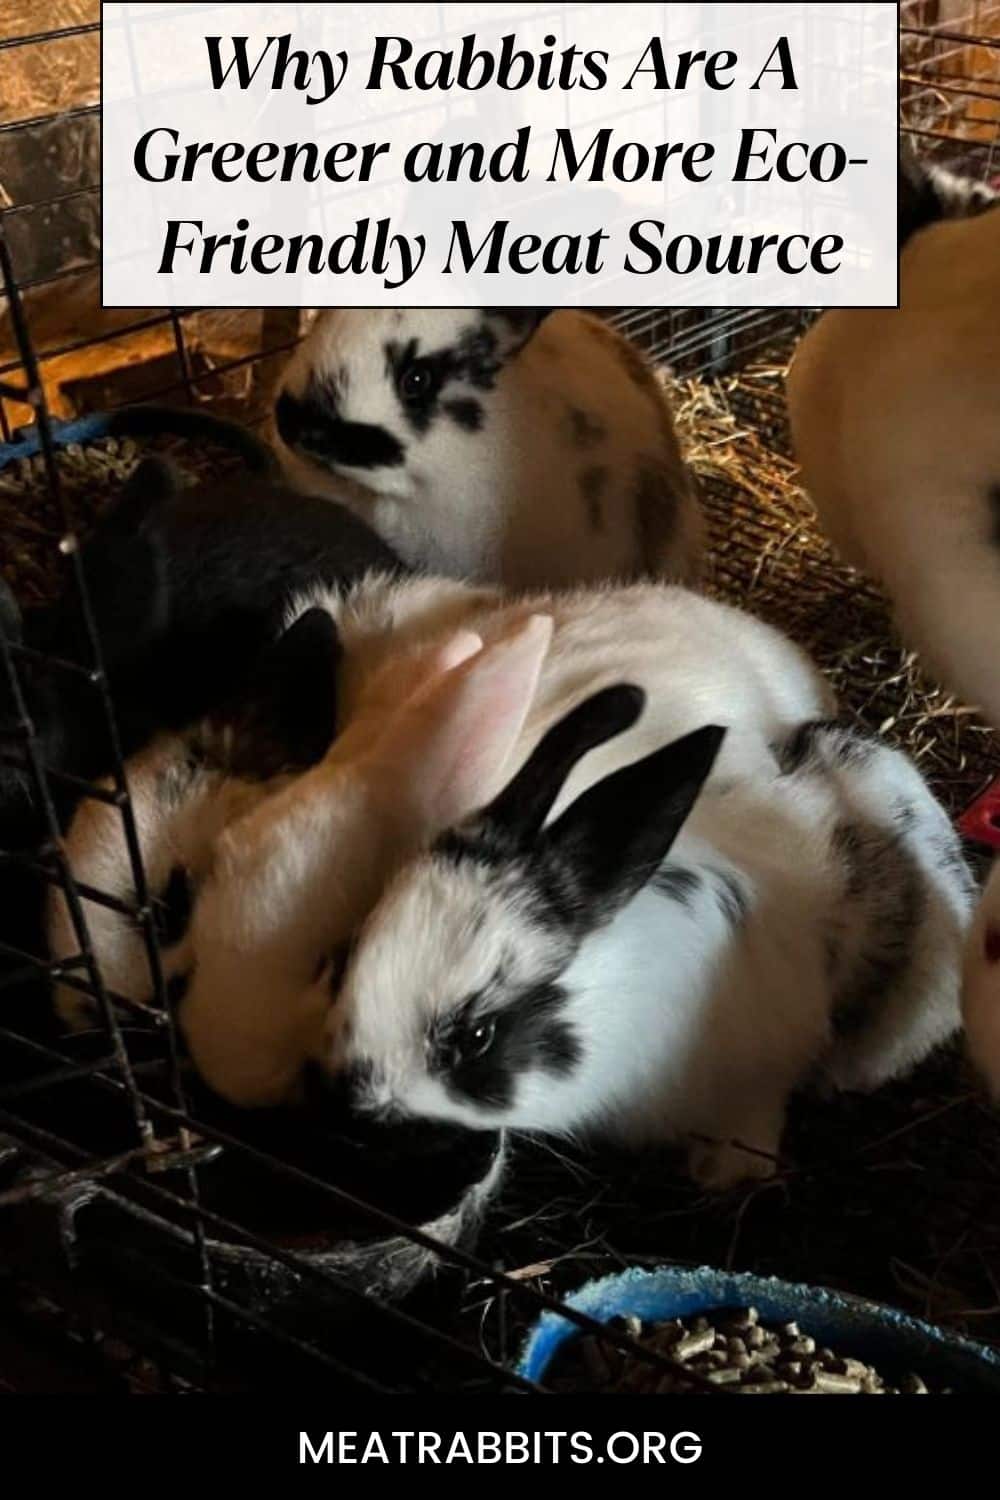 Why Rabbits Are A Greener and More Eco-Friendly Meat Source pinterest image.